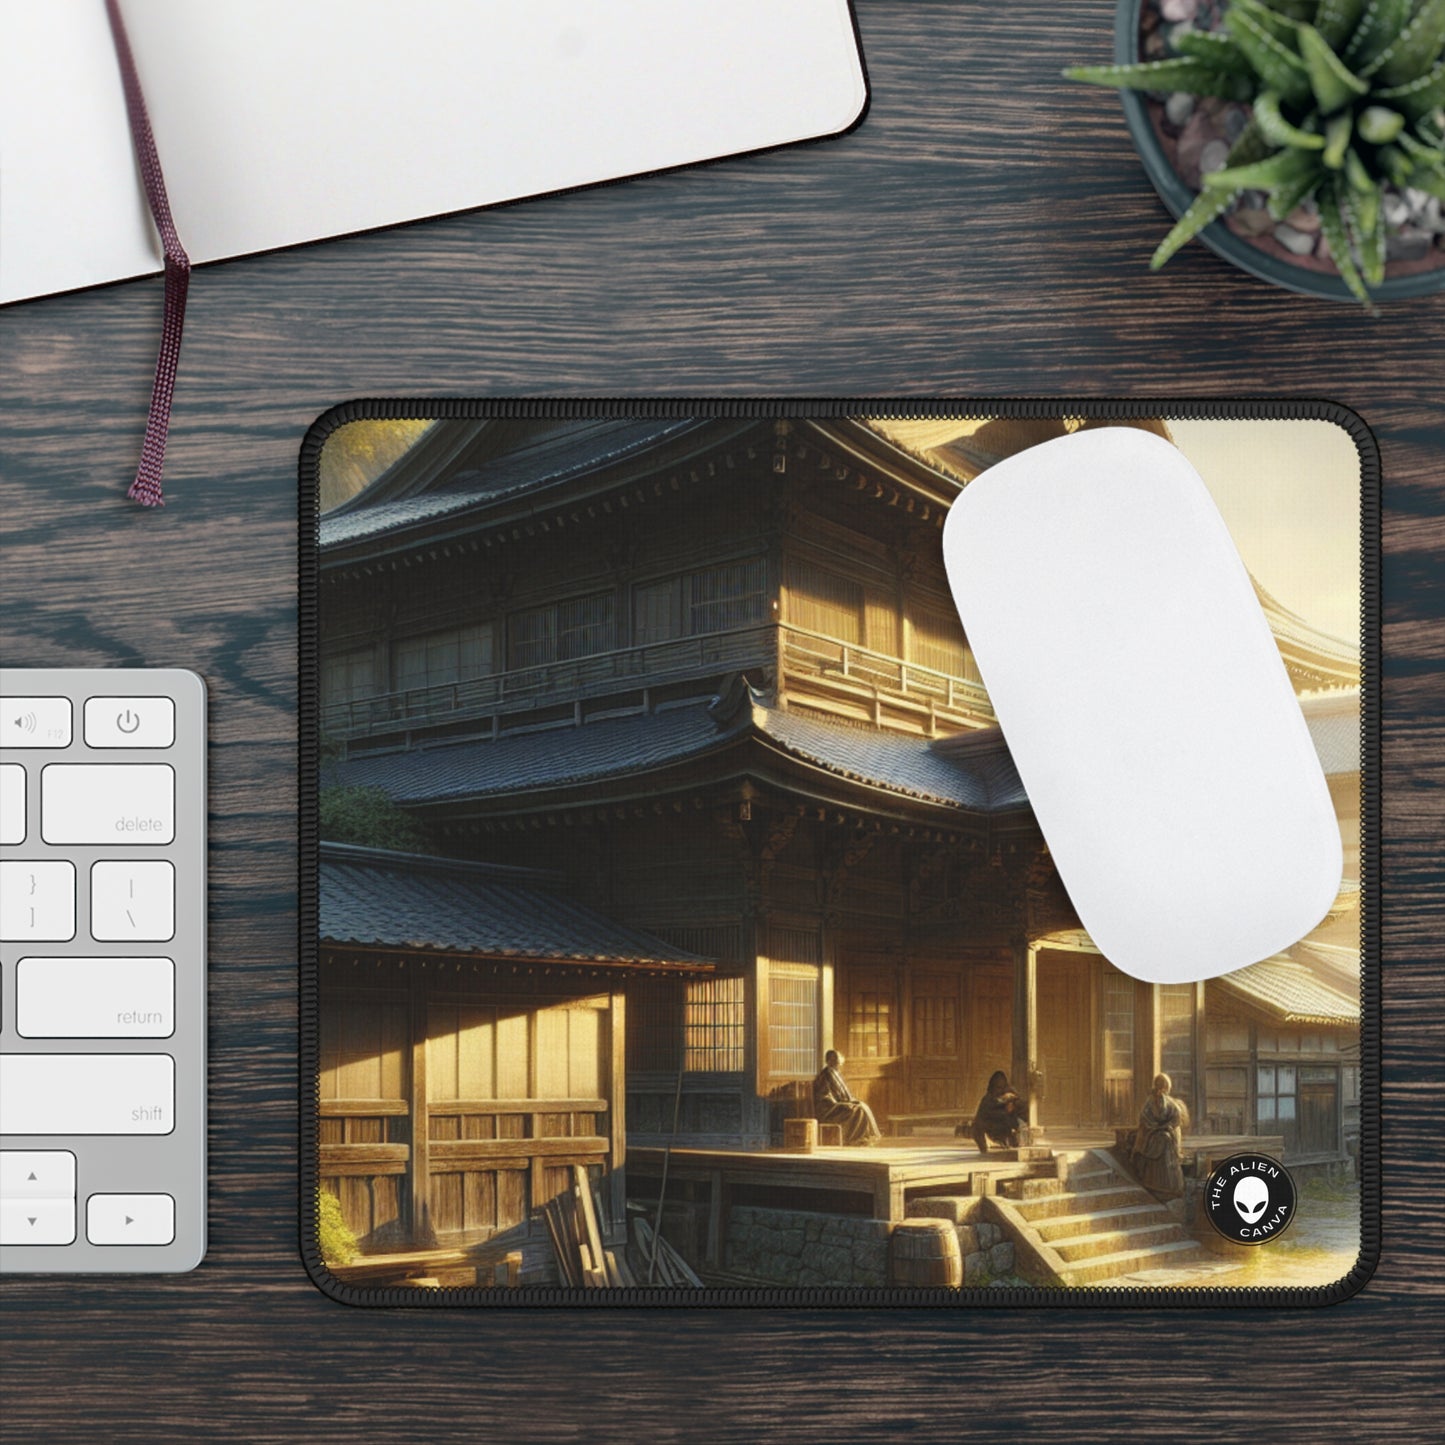 "Golden Hour Bliss: Photographic Realism Landscape" - The Alien Gaming Mouse Pad Photographic Realism